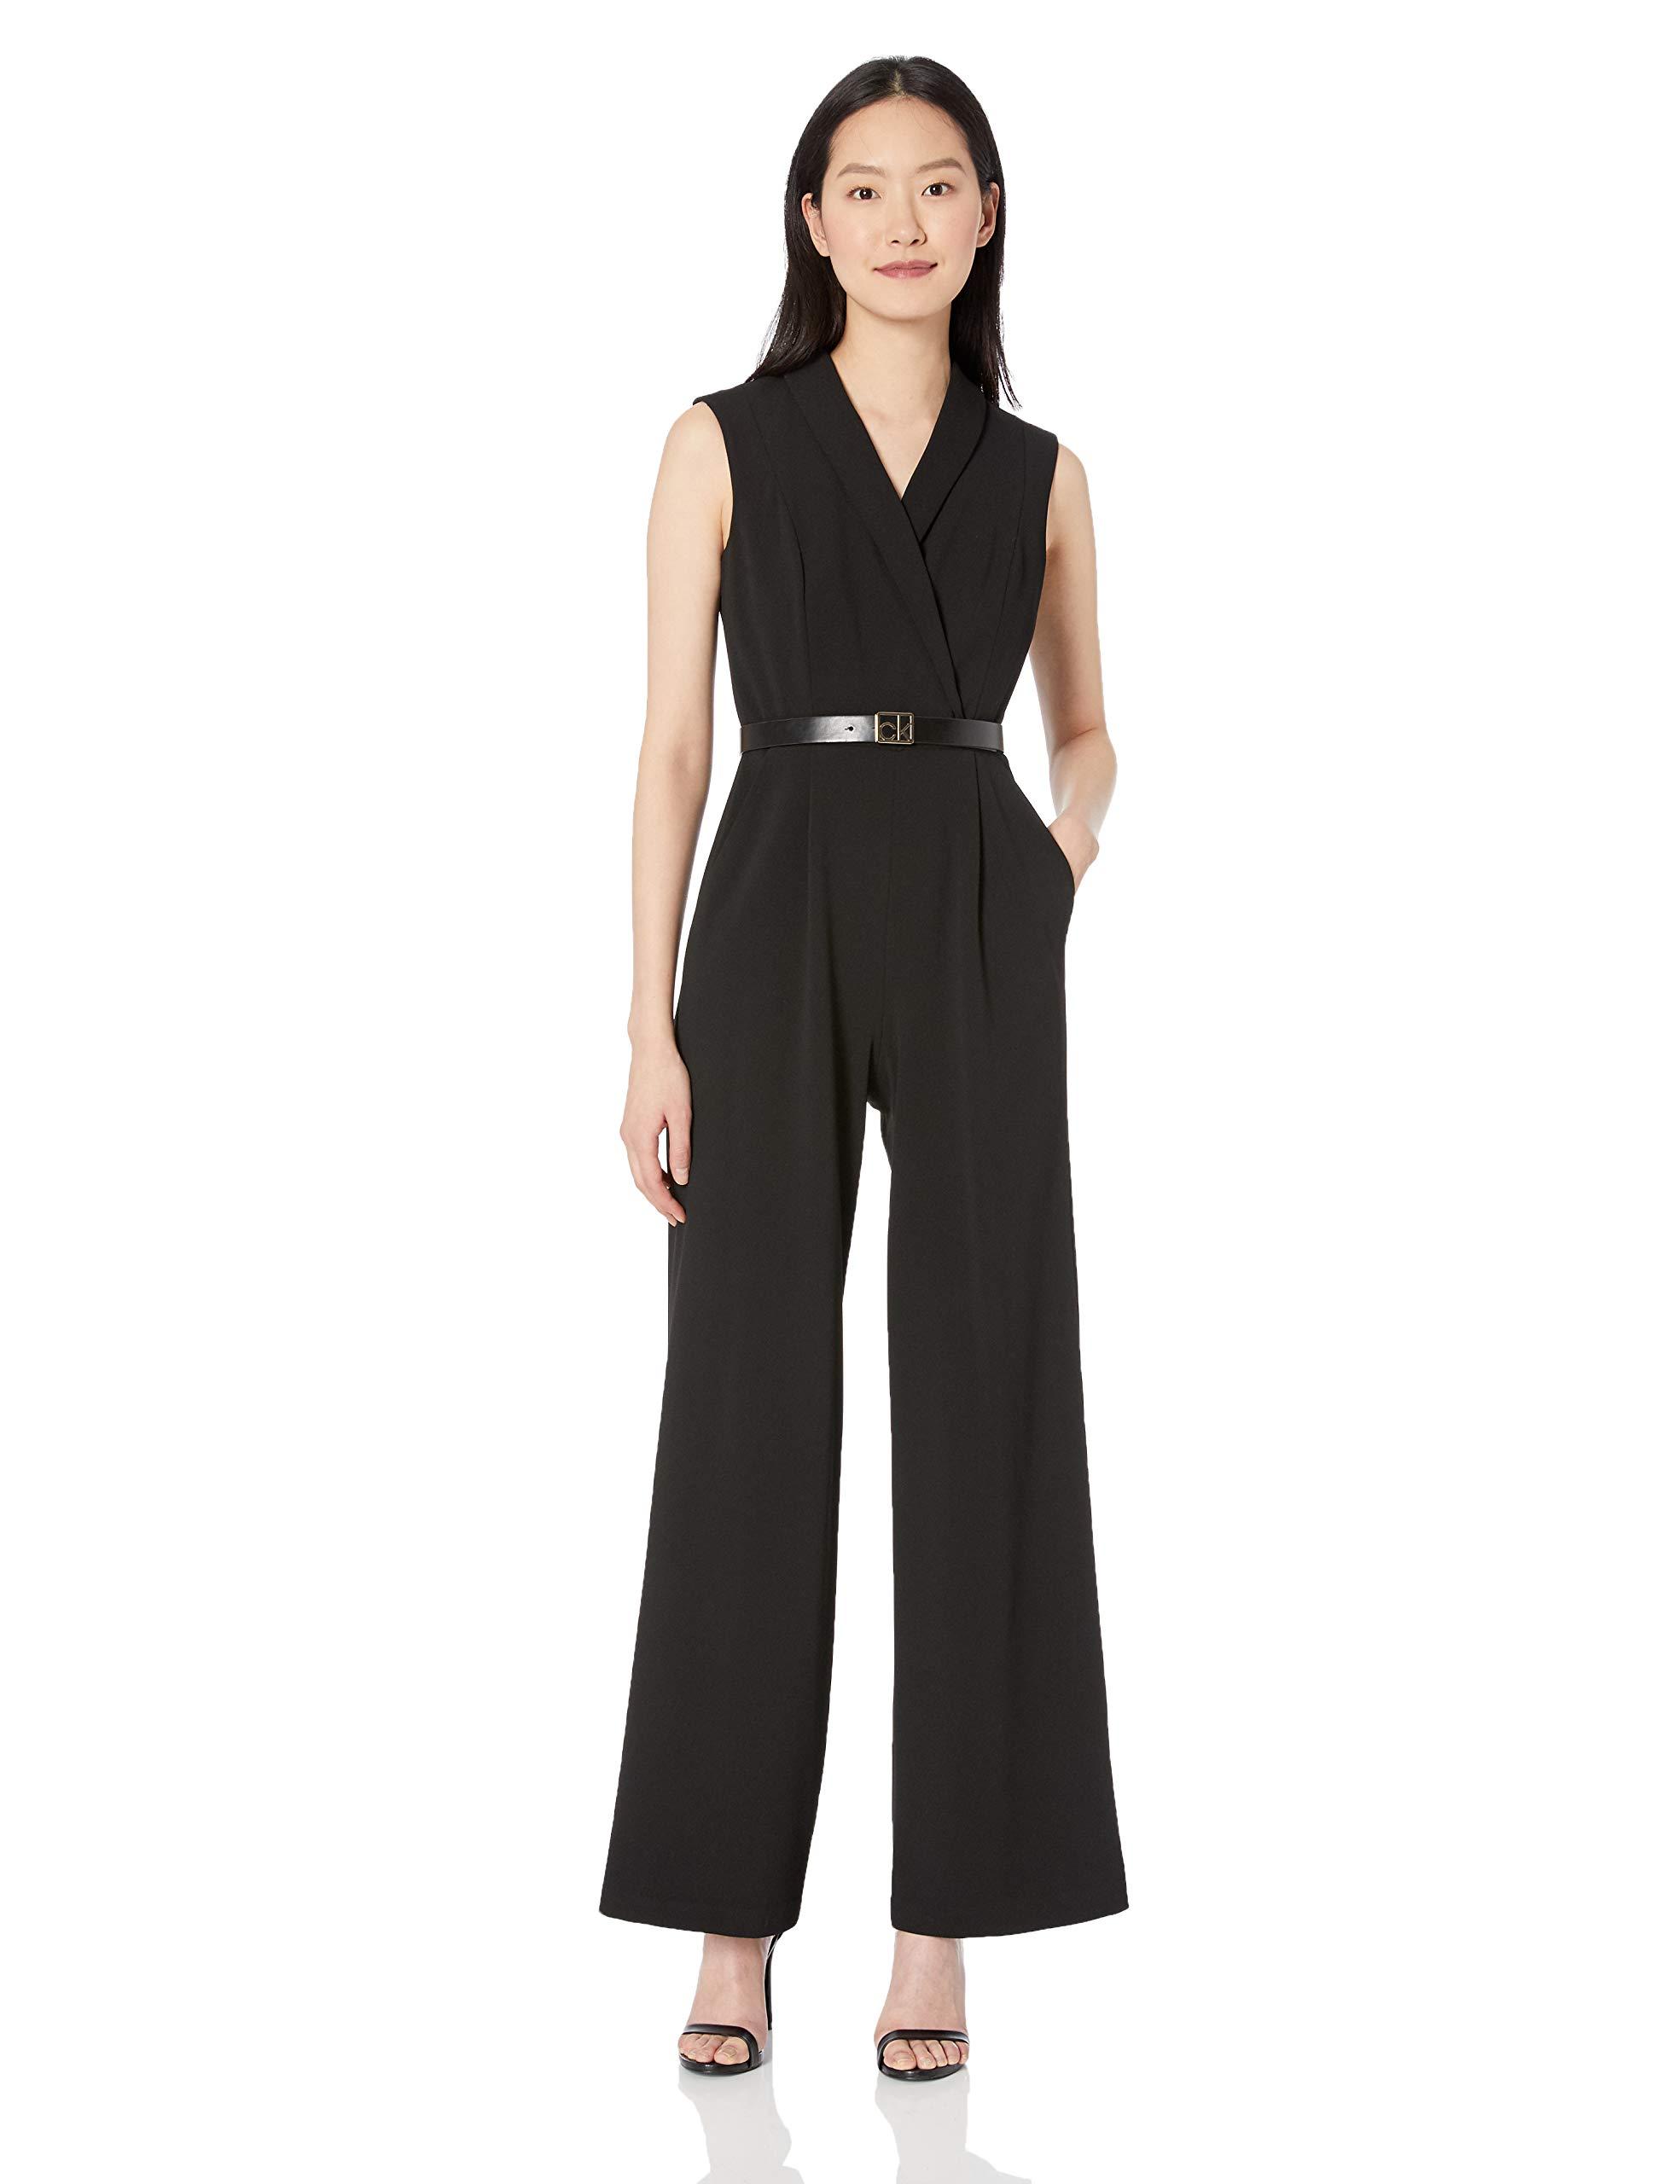 Calvin Klein Sleeveless Belted Jumpsuit With V Neck Collar in Black | Lyst